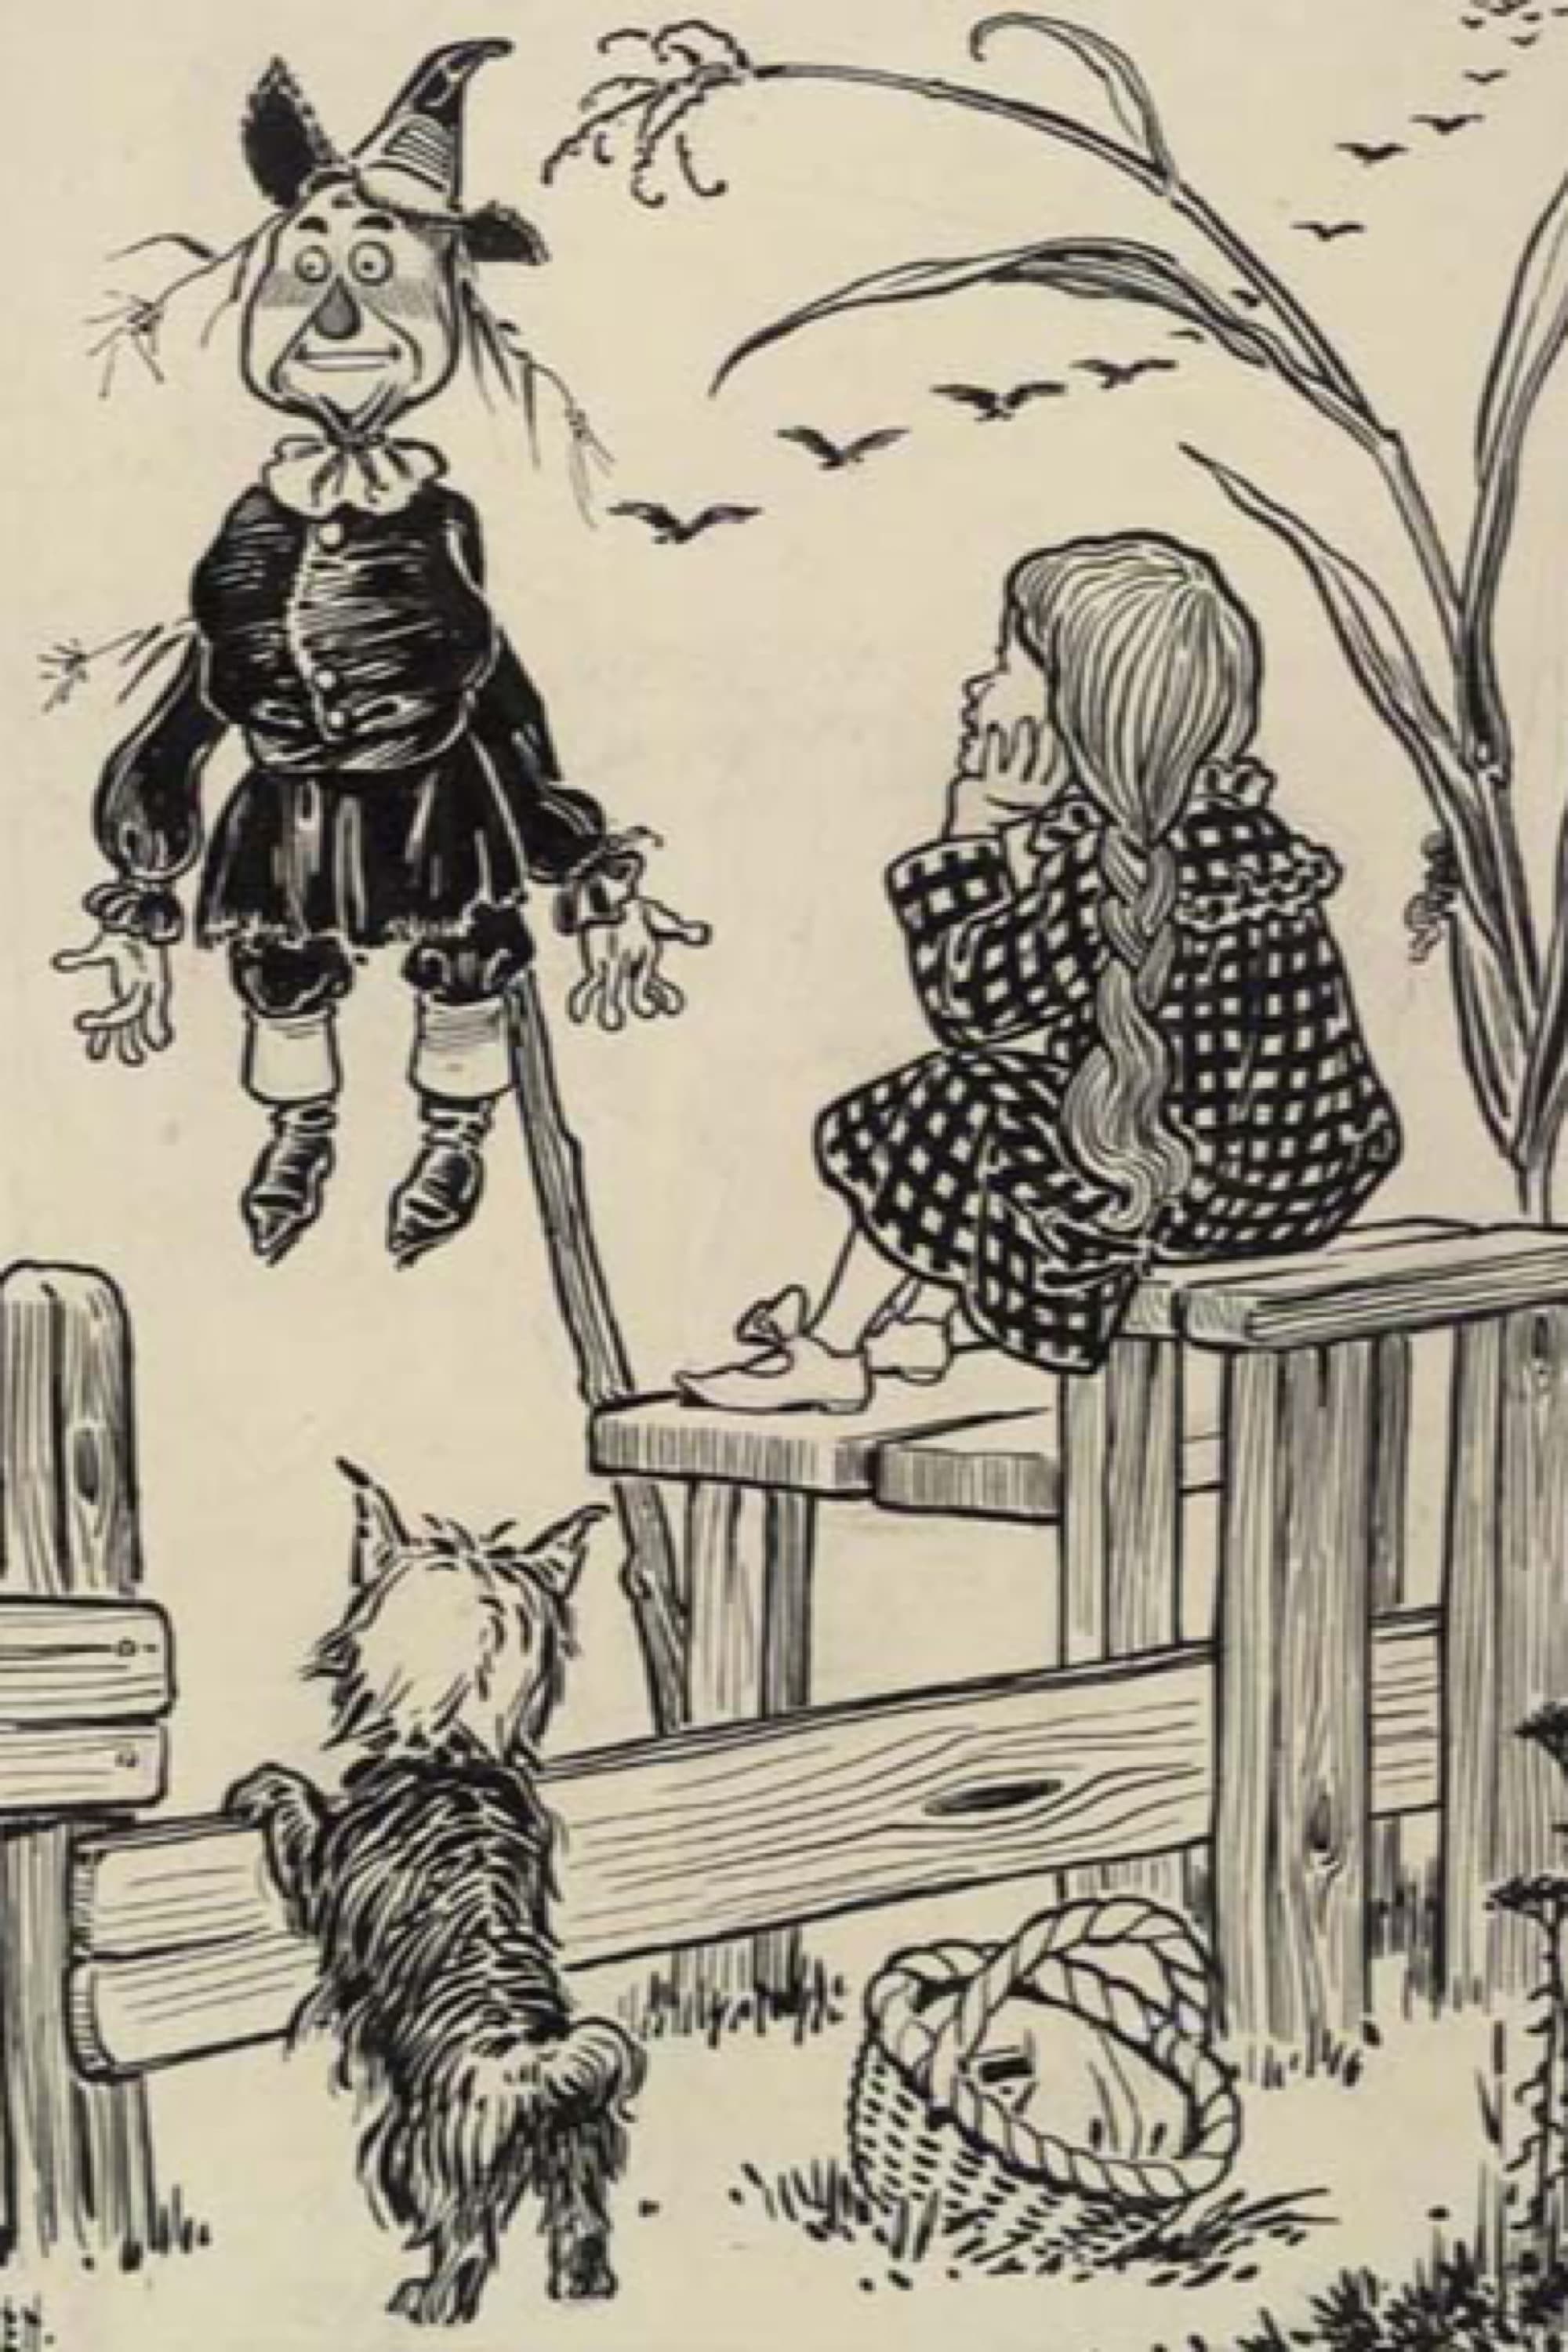 Dorothy and the Scarecrow in Oz Poster